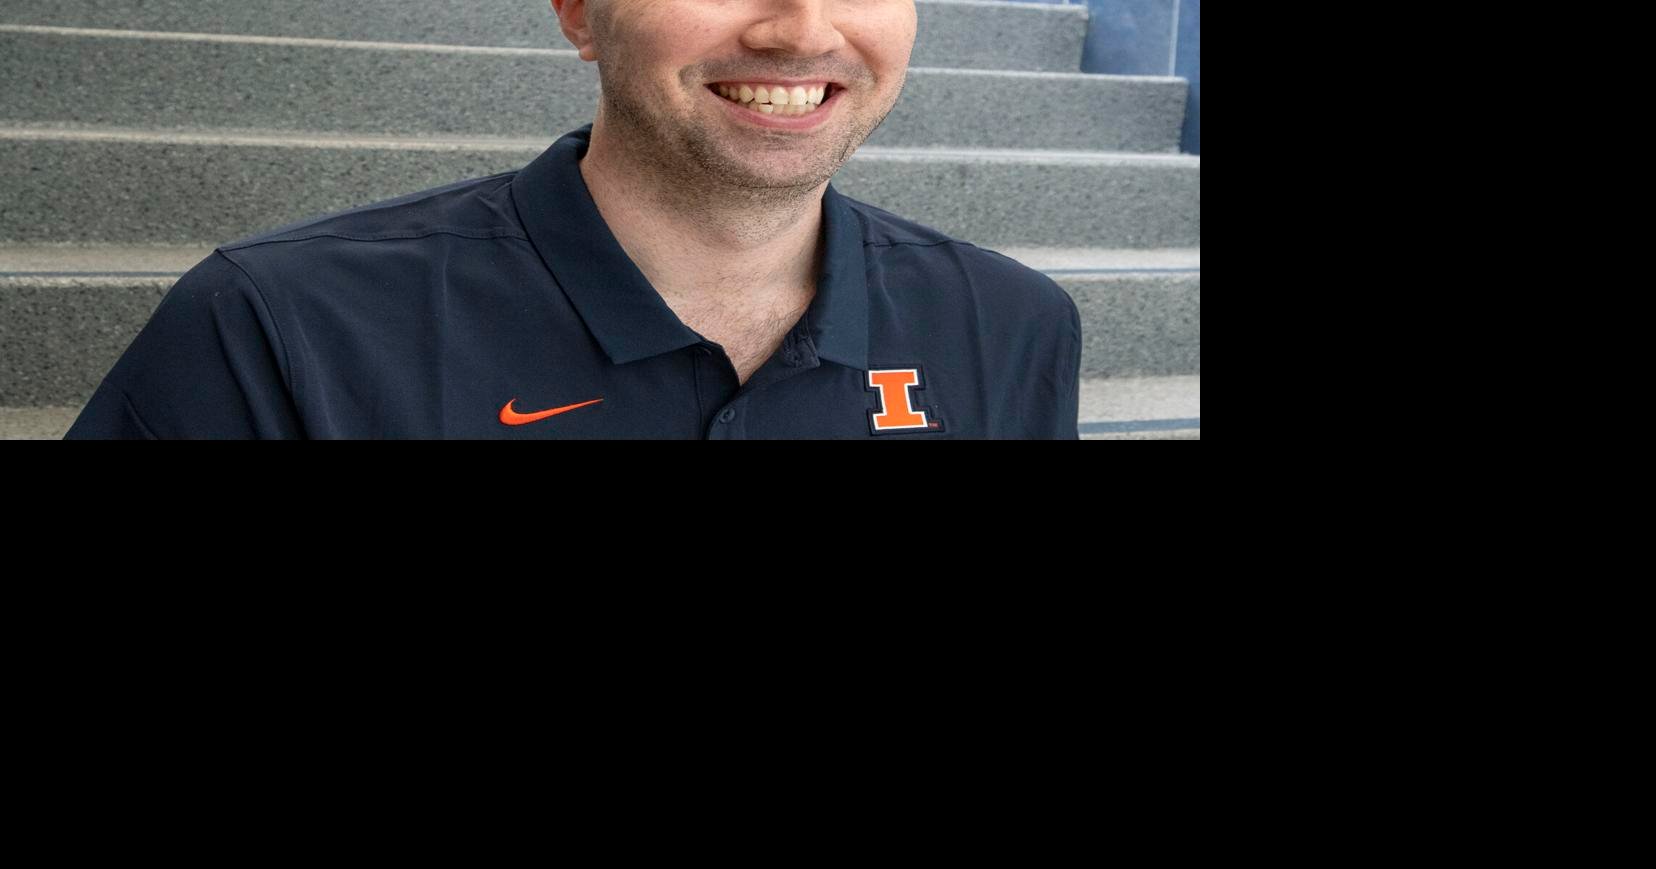 Gensler happy to be reunited with ‘family’ on Illinois staff